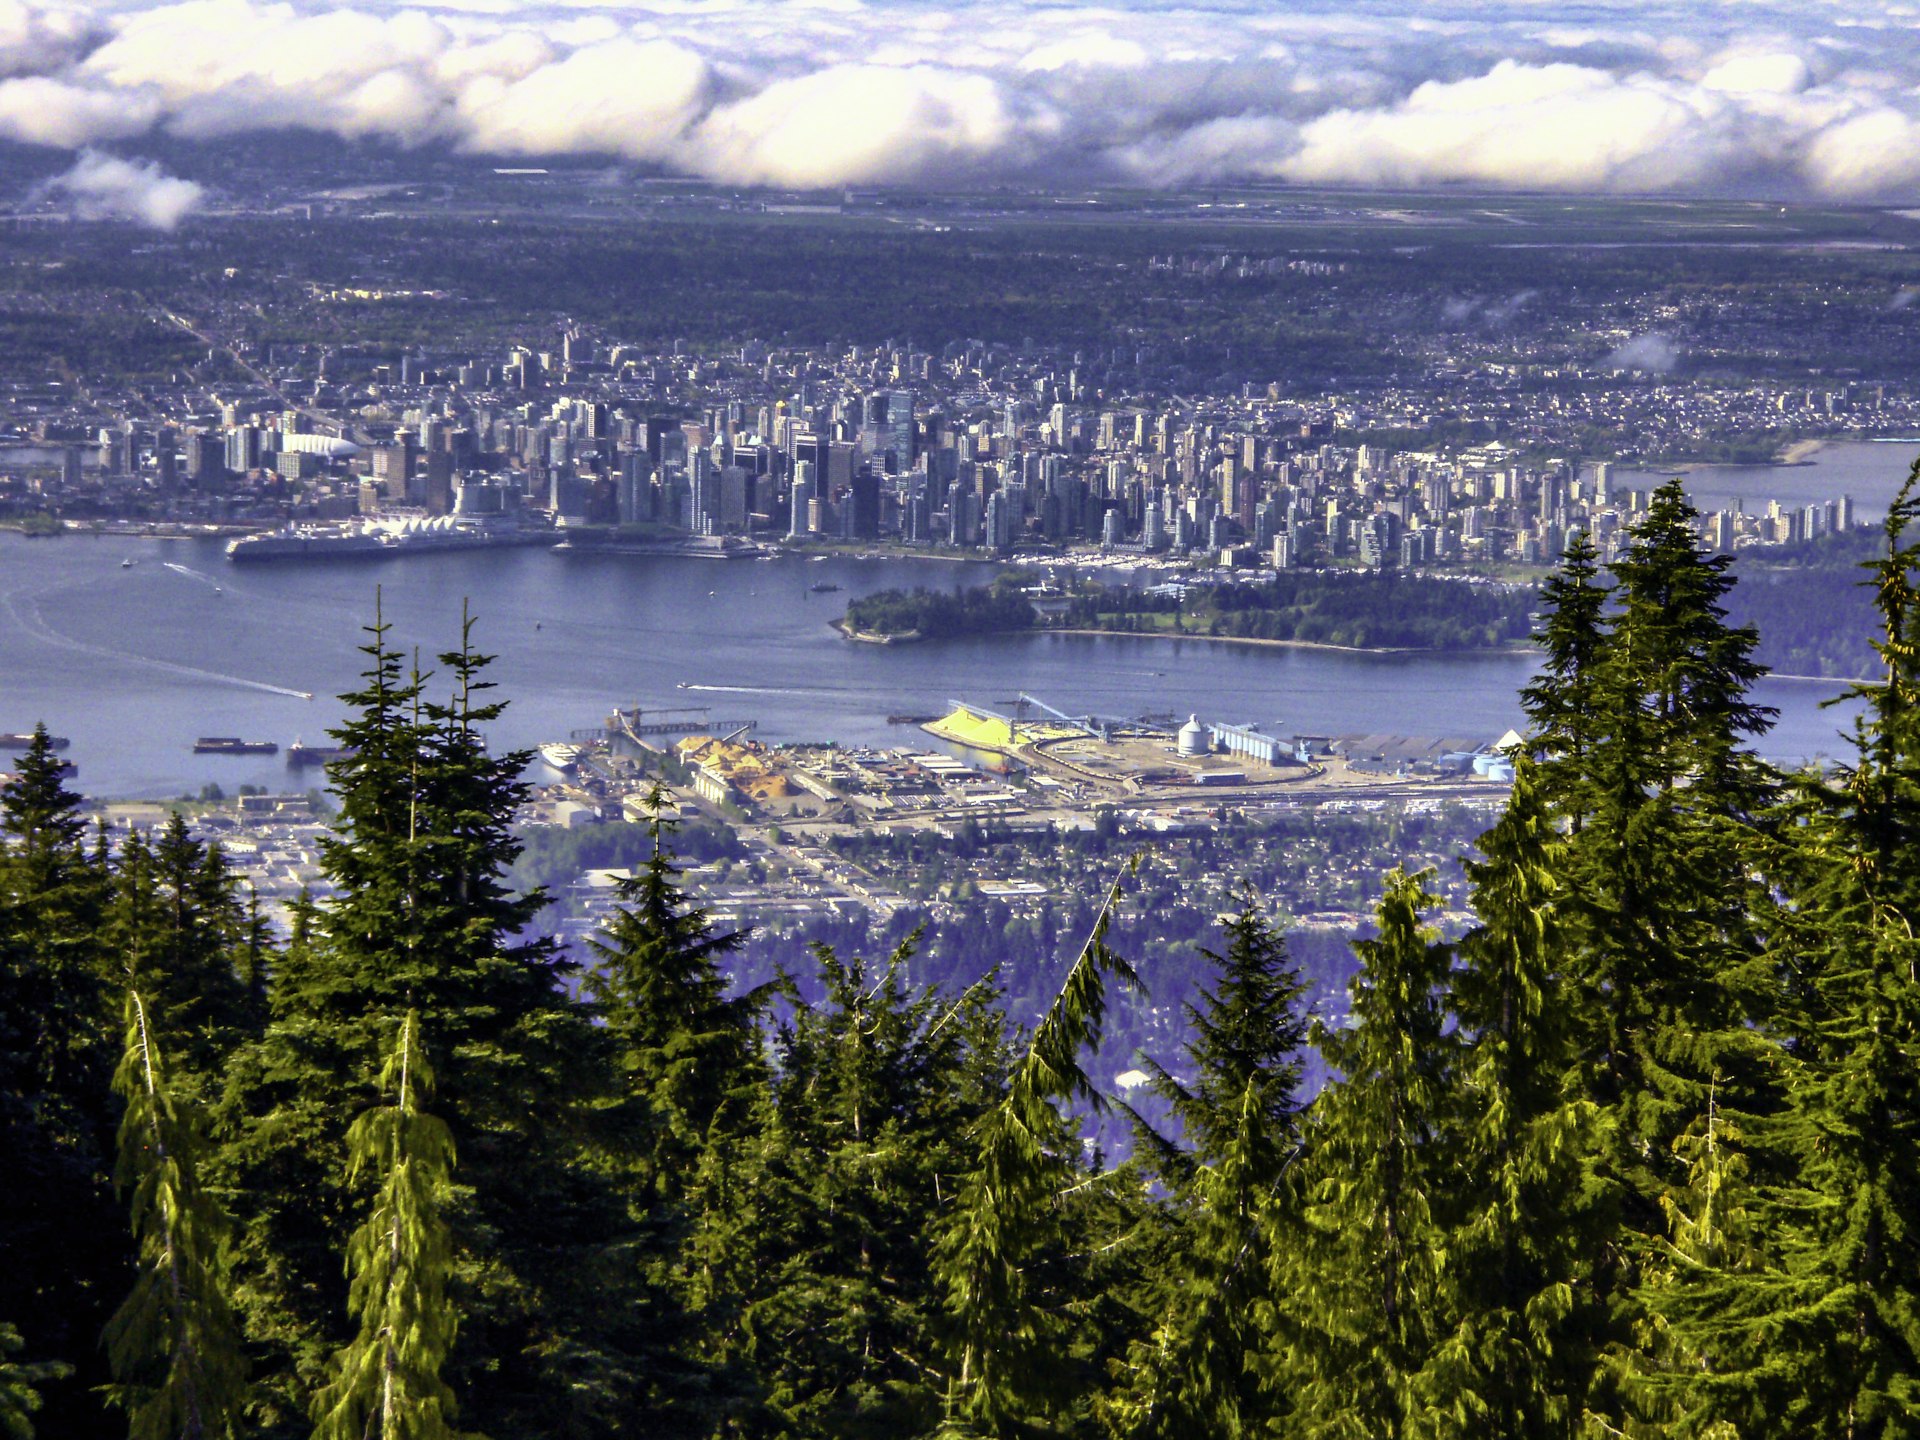 A view of the Vancouver skyline from the top of Grouse Mountain, British Columbia, Canada